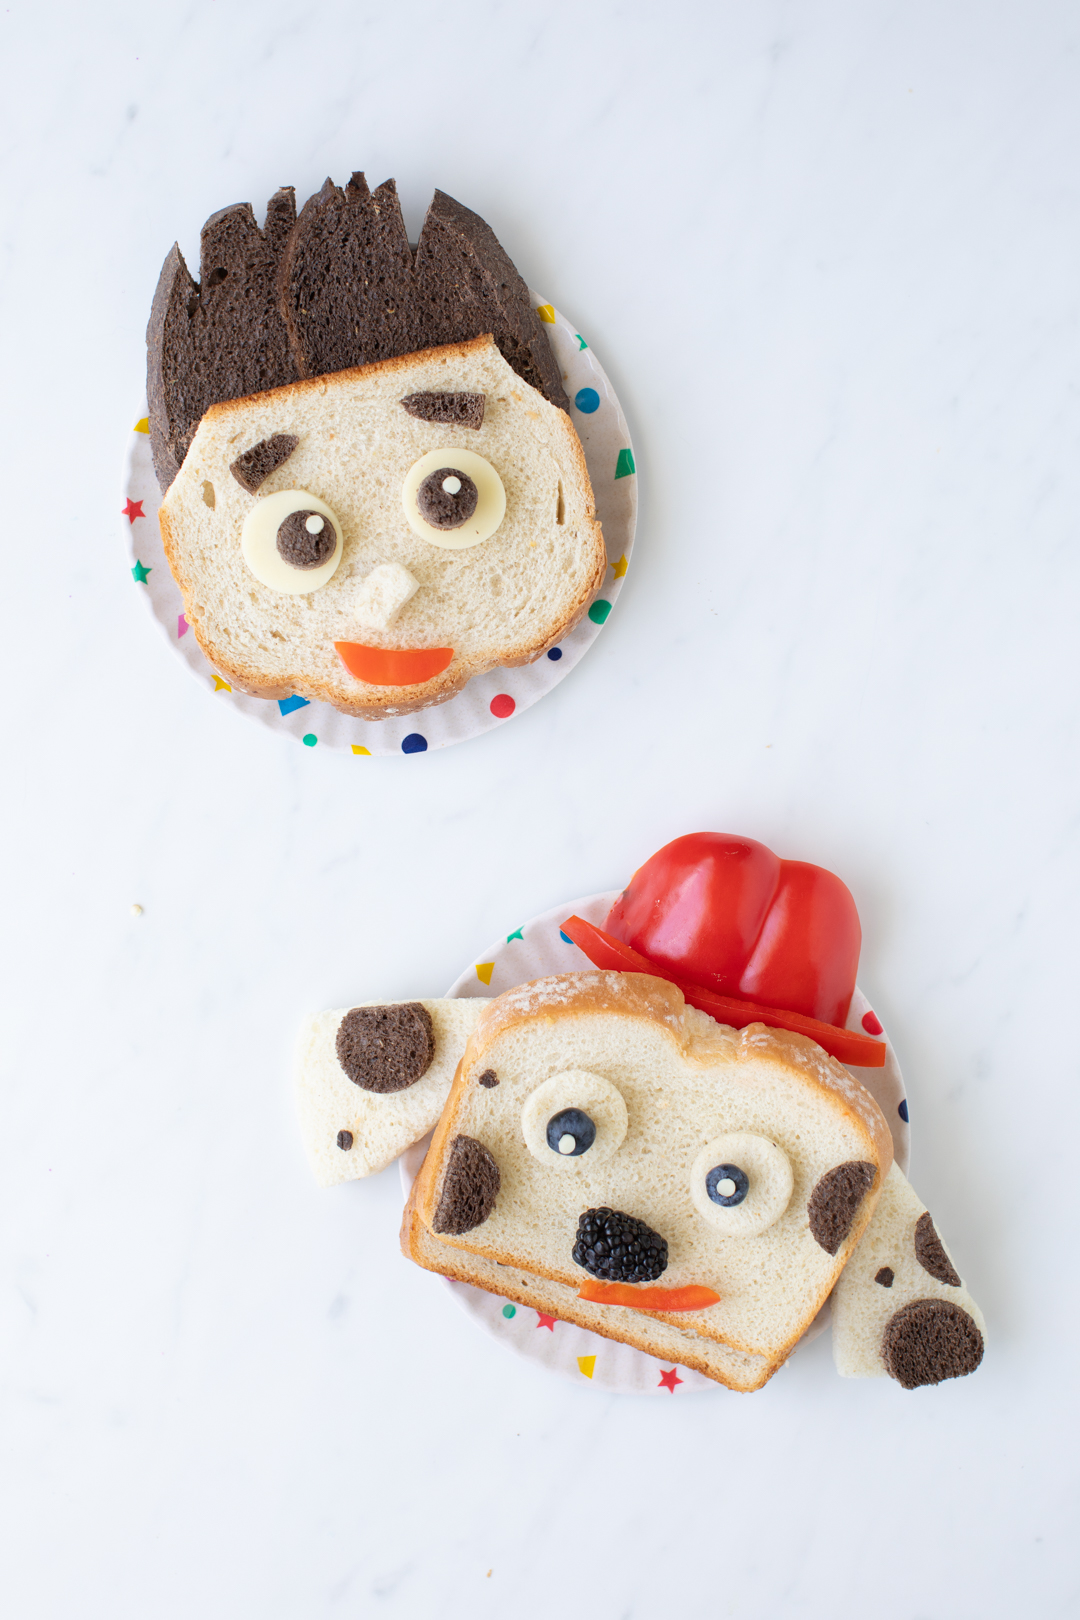 marshall and ryder sandwiches to celebrate paw patrol